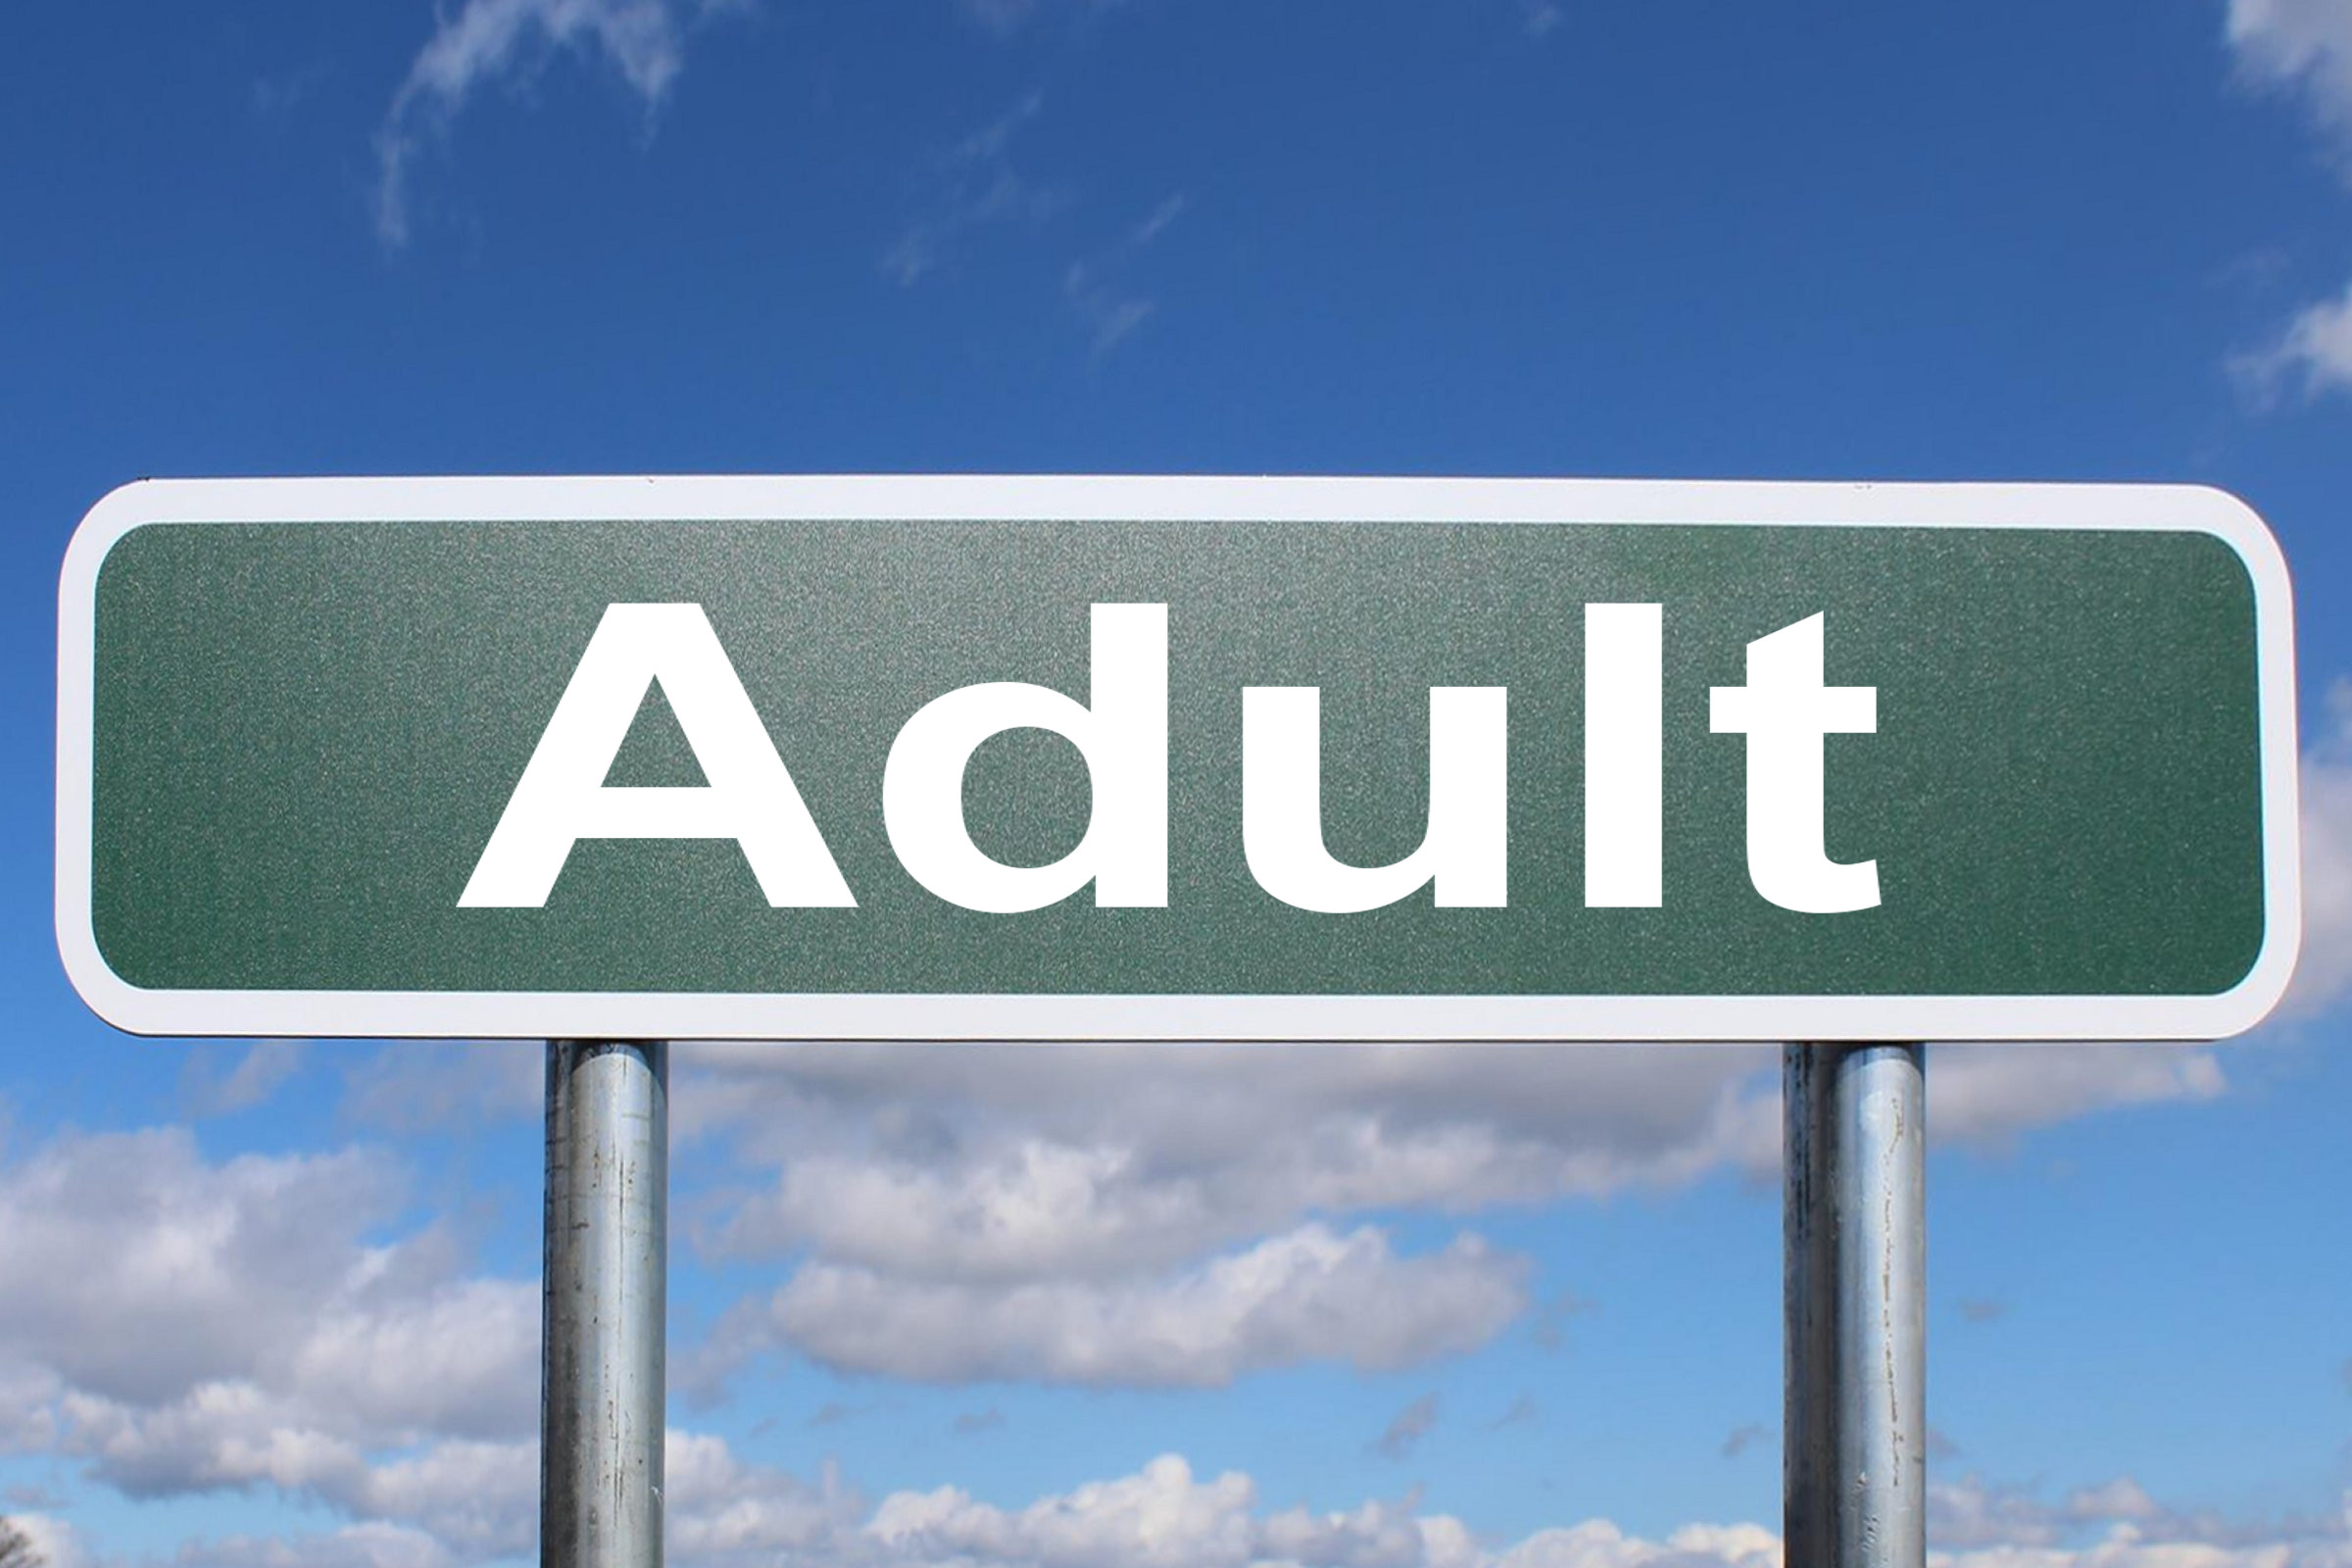 Adult Free Of Charge Creative Commons Highway Sign Image